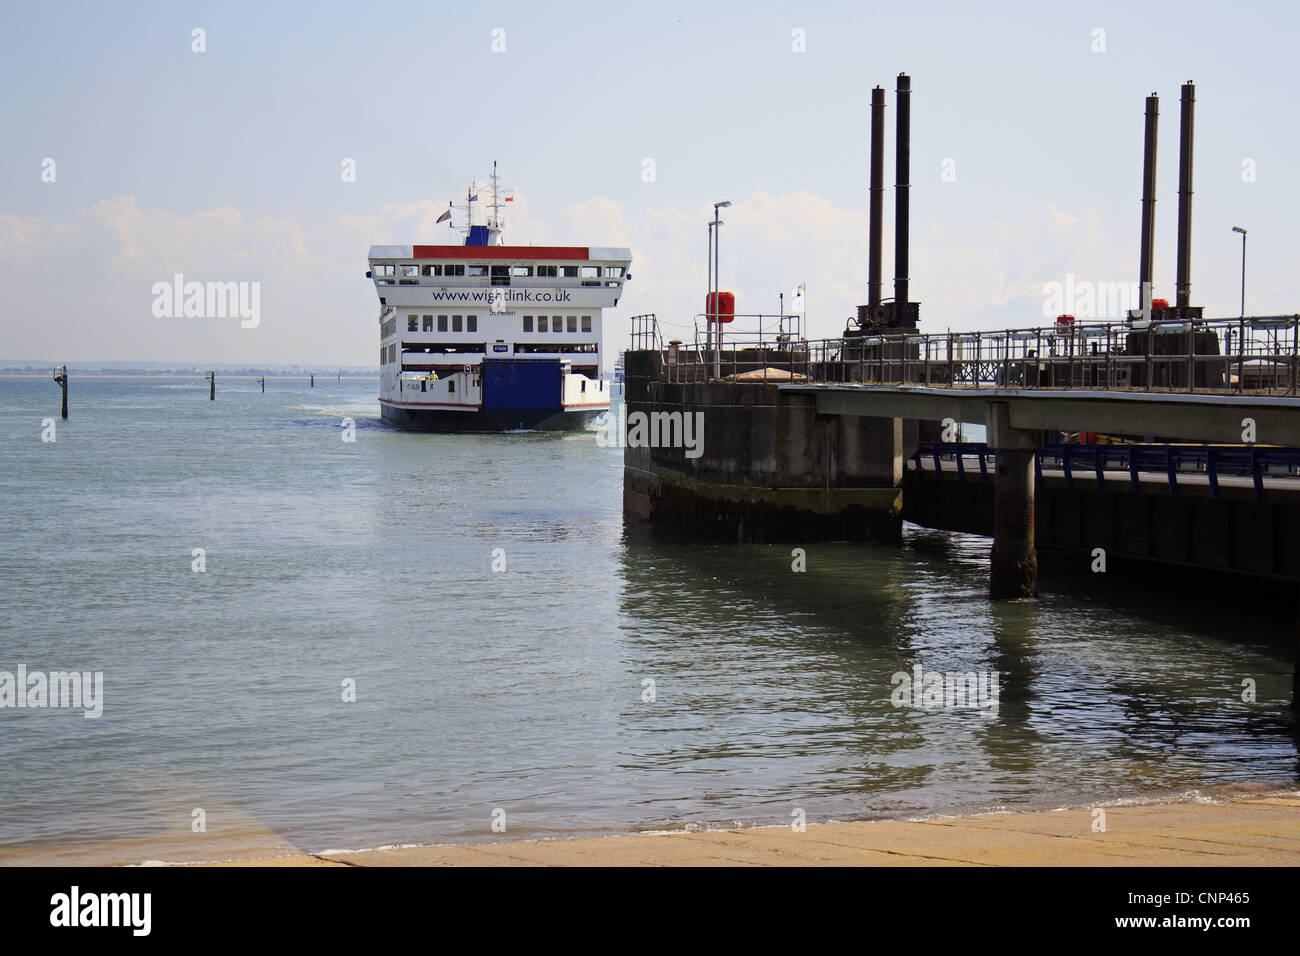 Wightlink ferry arriving in harbour, Wootton Creek, Fishbourne, Isle of Wight, England, july Stock Photo